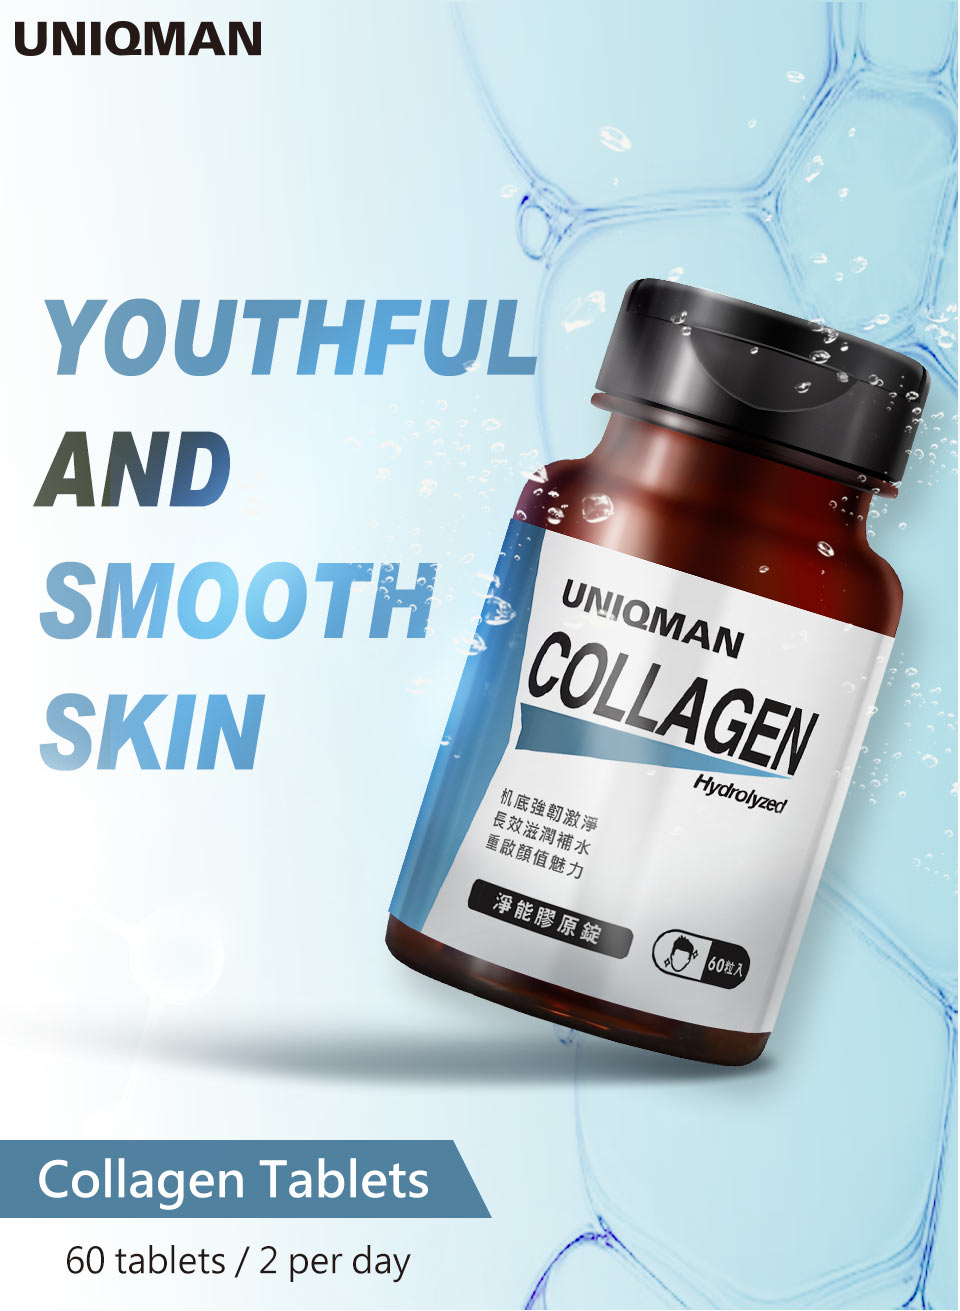 UNIQMAN Collagen protein gradually released in the intestine regions and absorption enhancement 